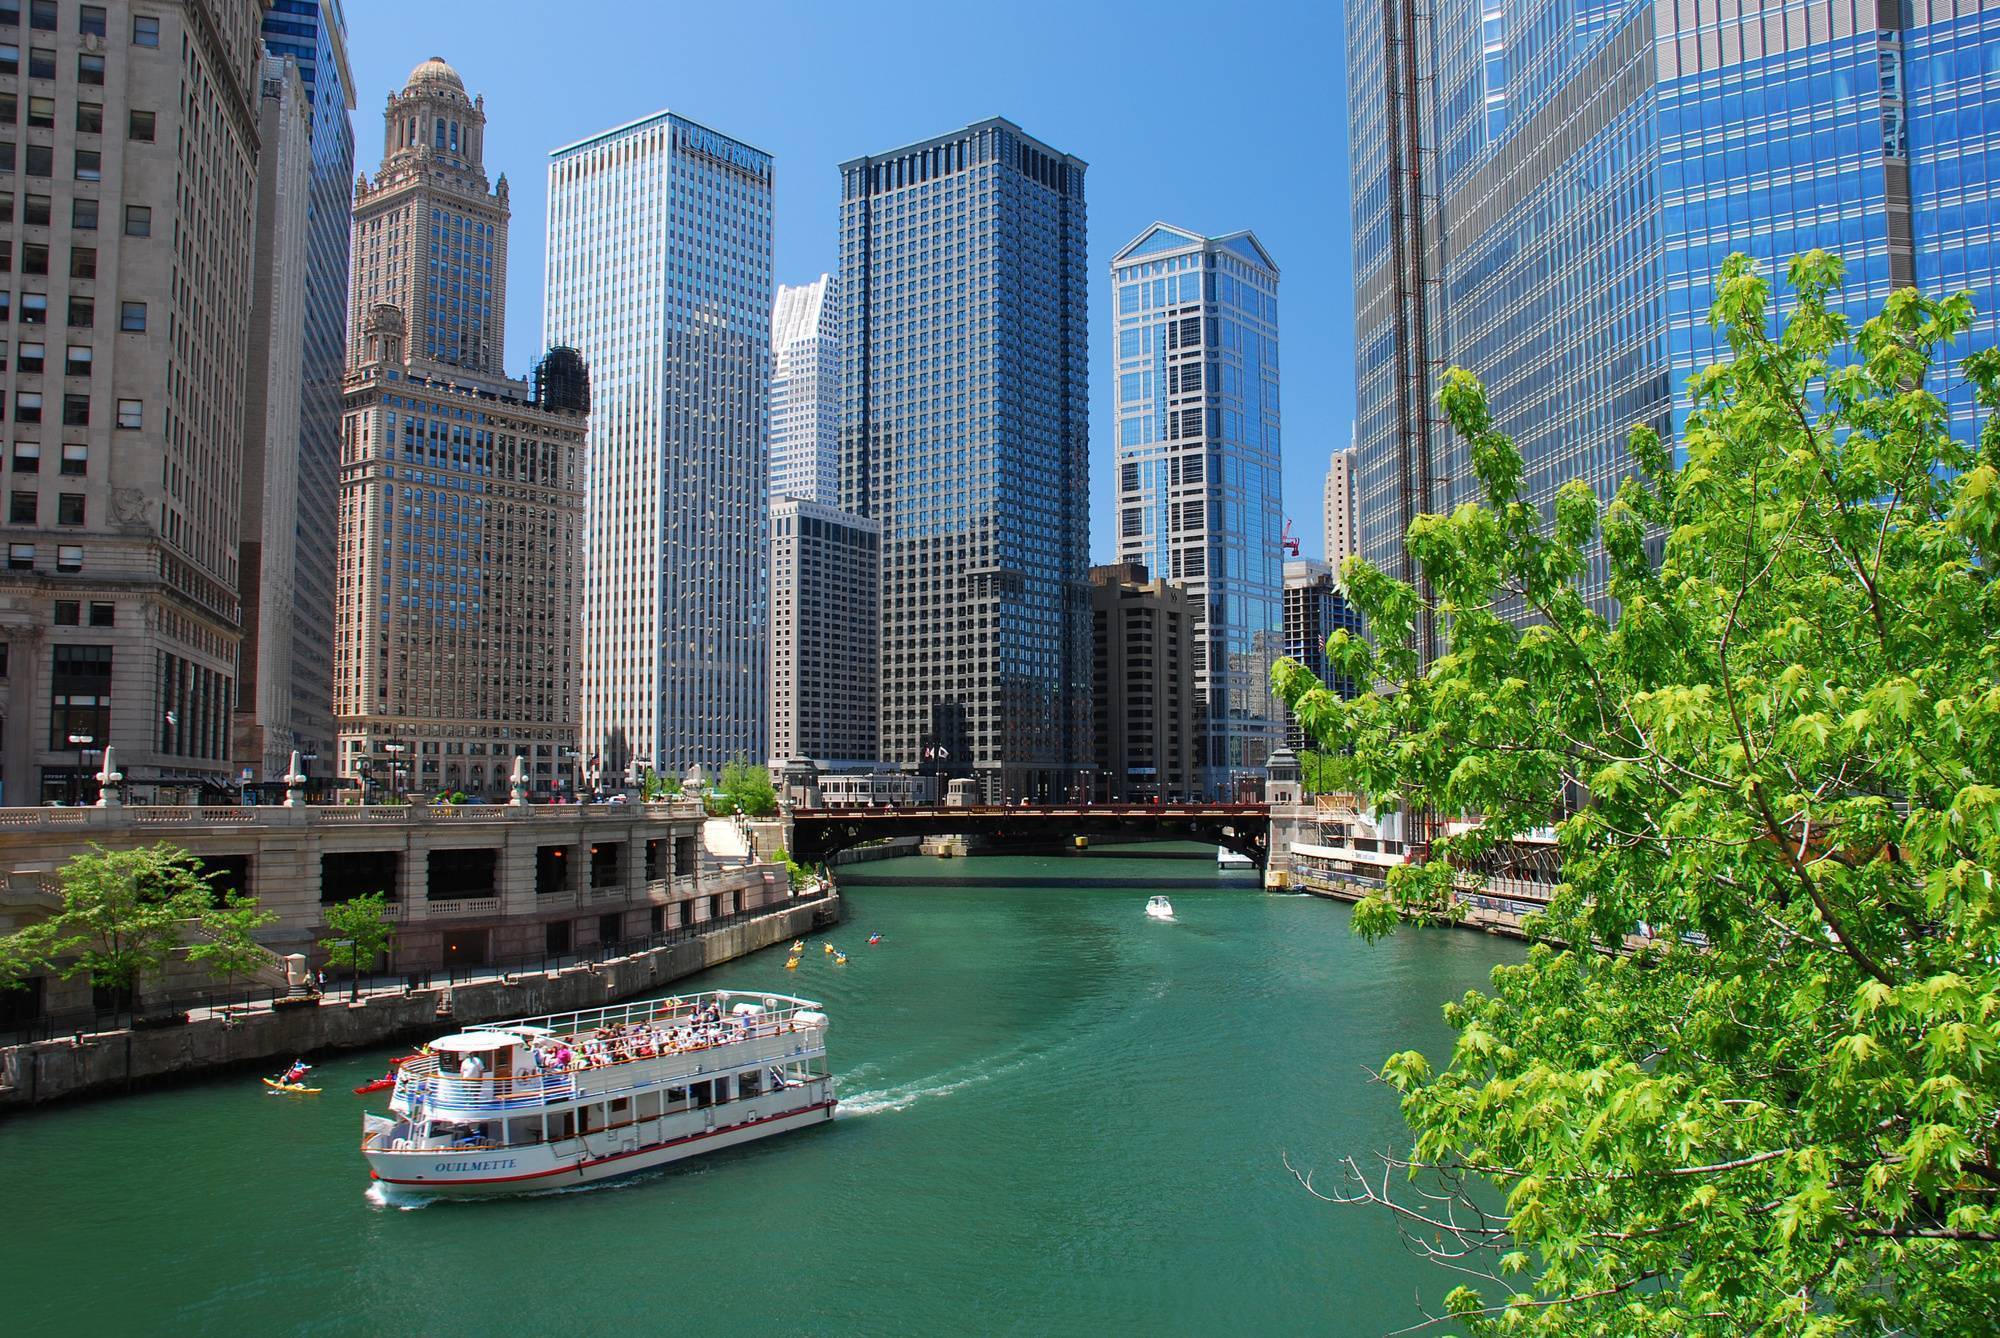 Are you currently living in Chicago? Here's some hidden tips you might want to know.